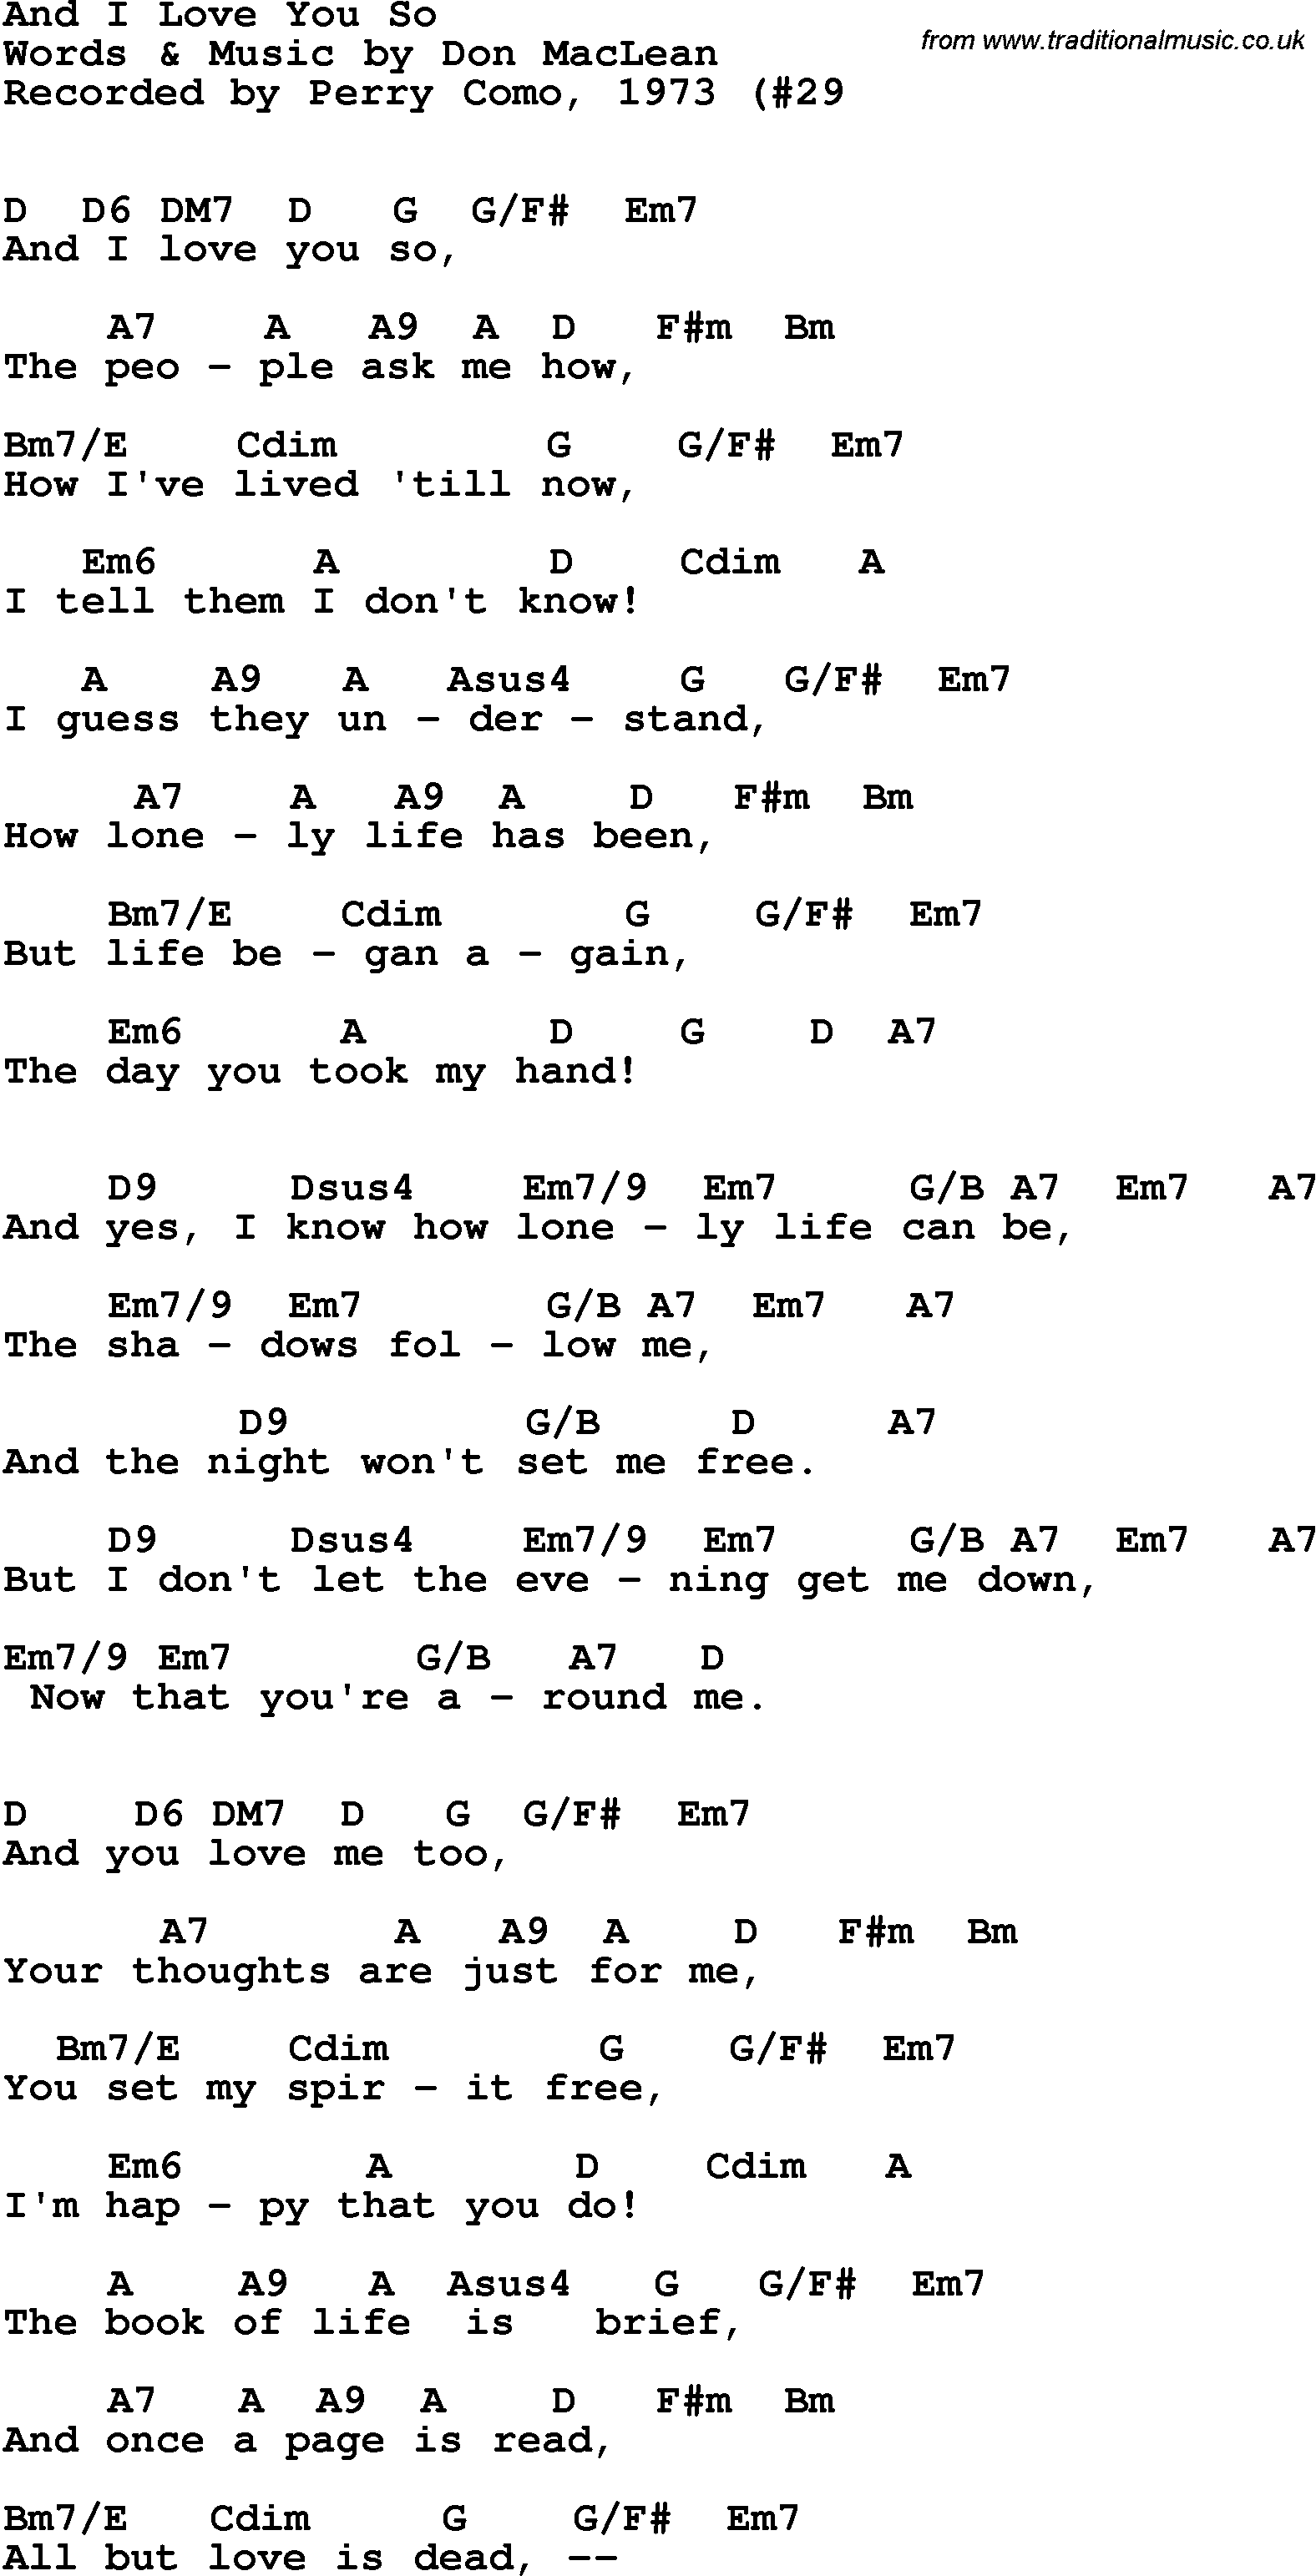 Song Lyrics with guitar chords for And I Love You So - Perry Como, 1973